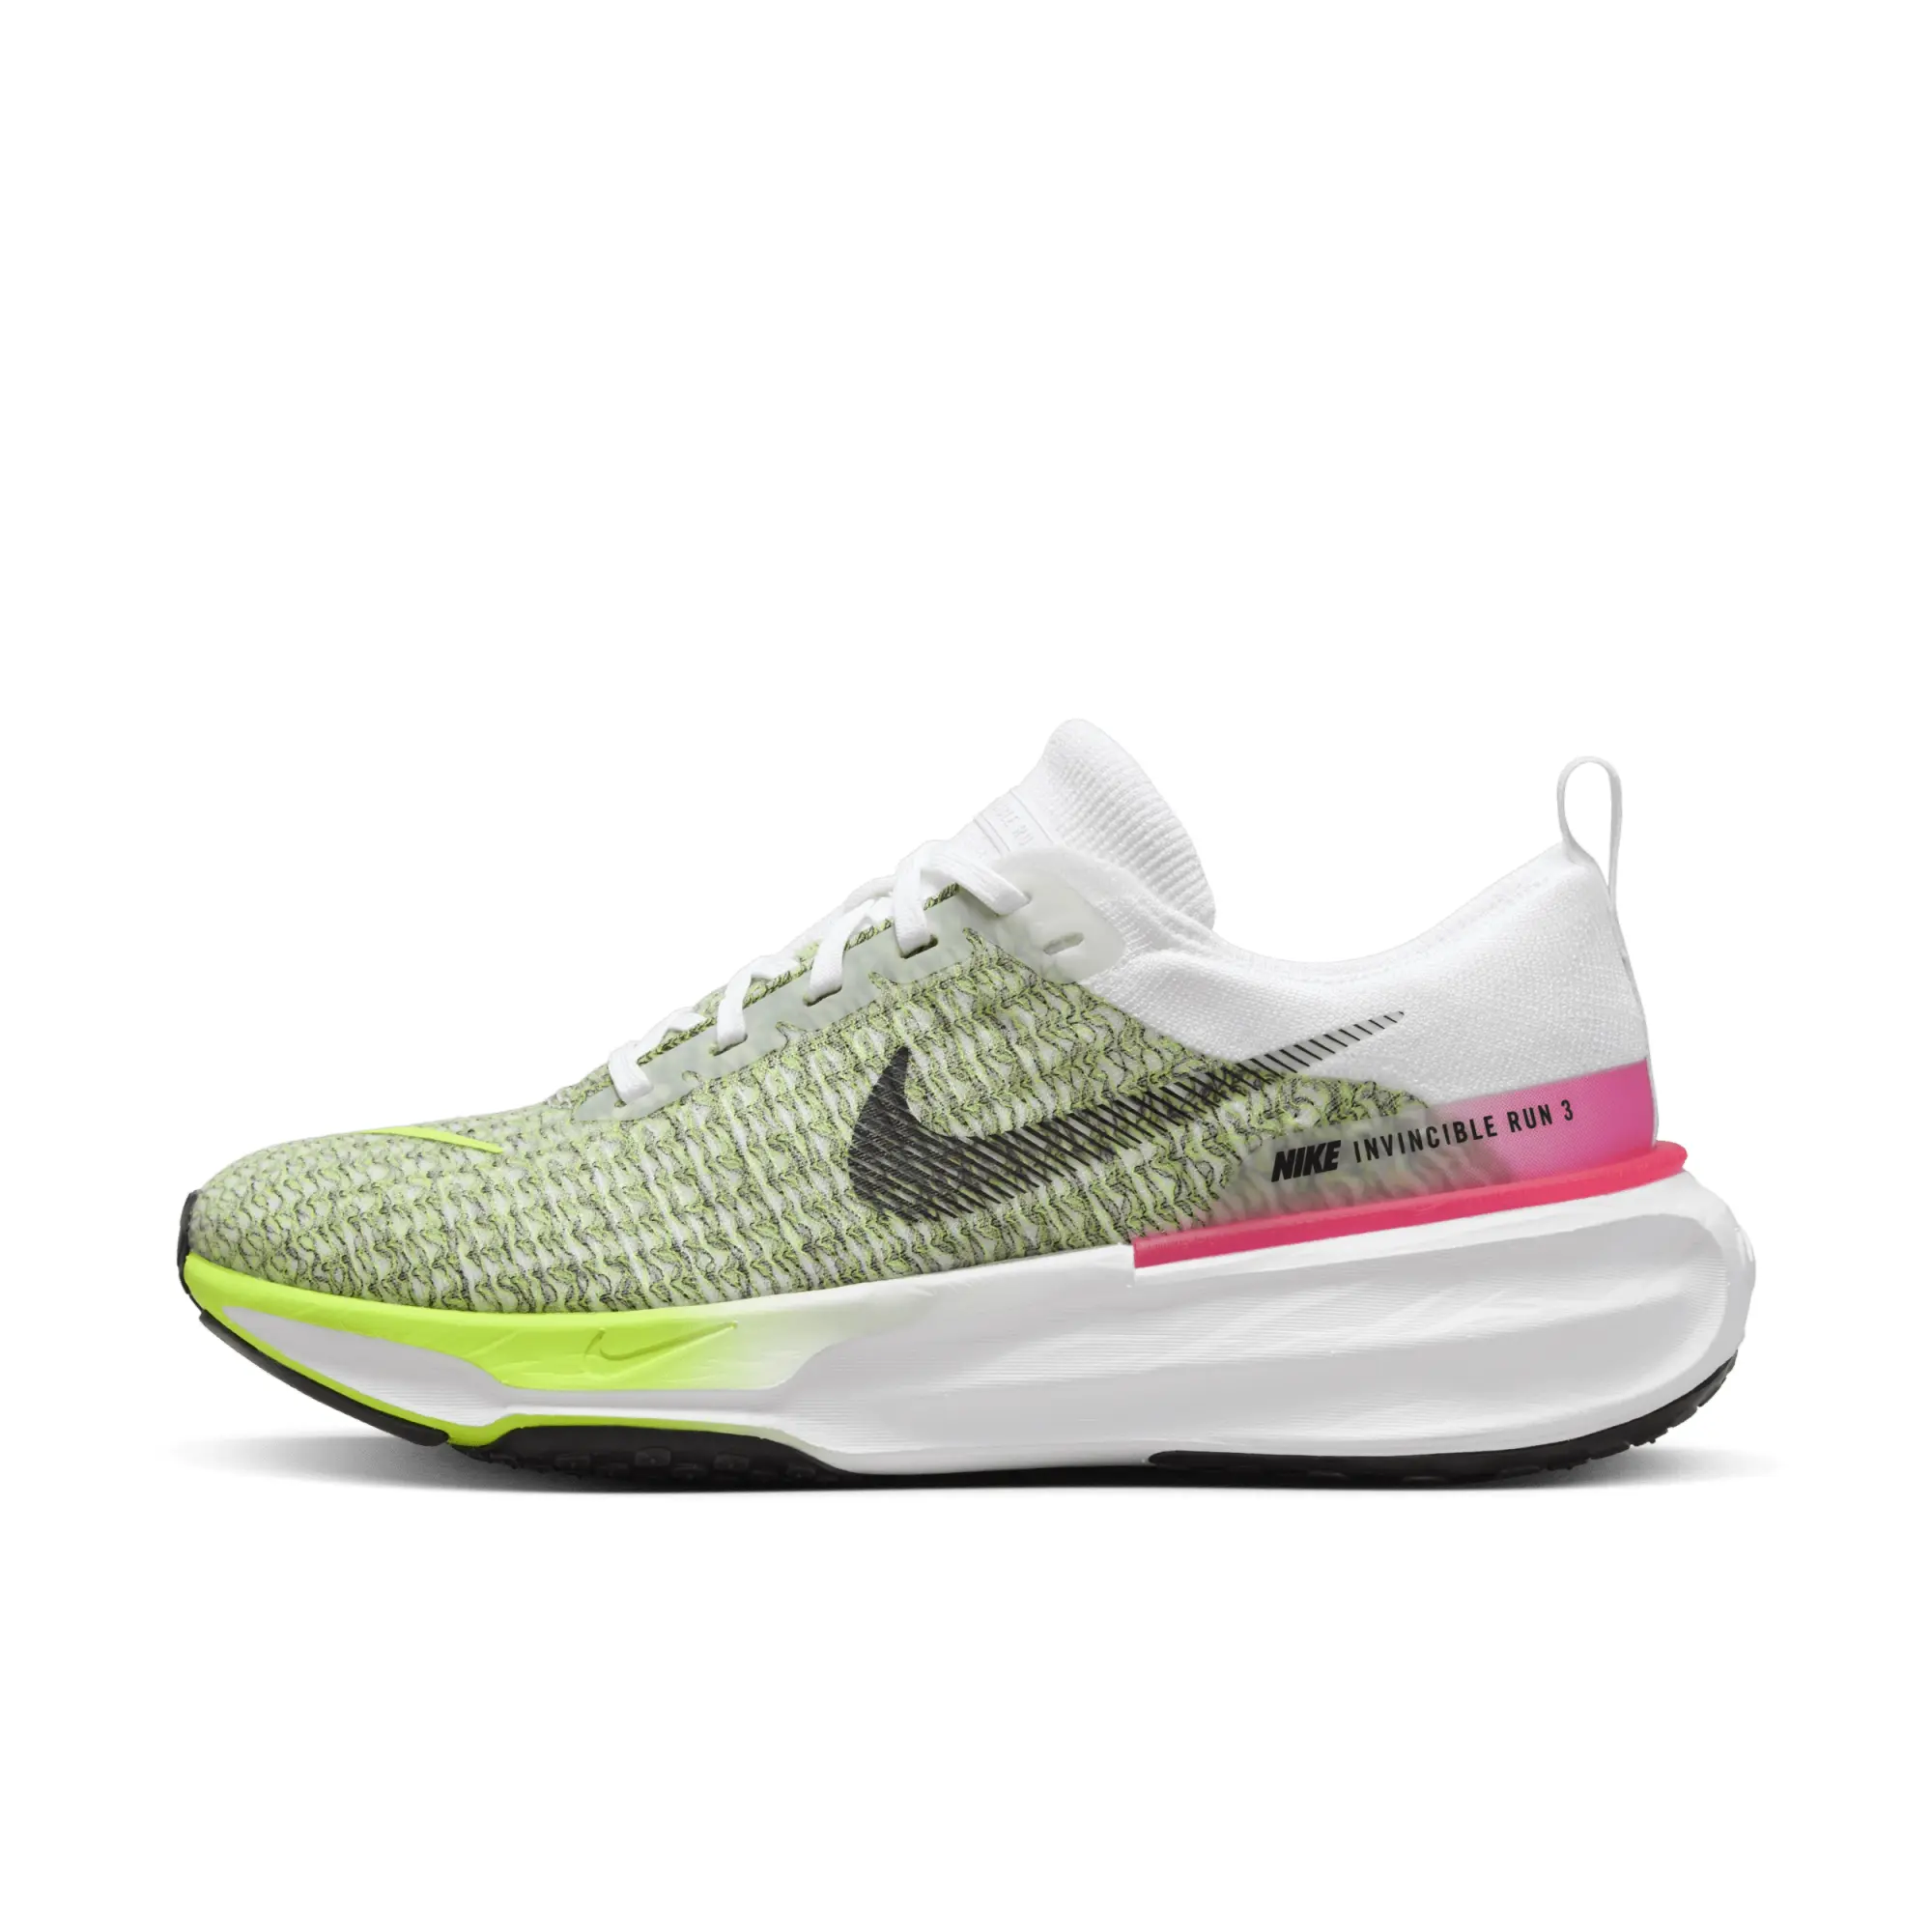 Nike ZoomX Invincible Run 3 White Volt Hyper Pink Shoes